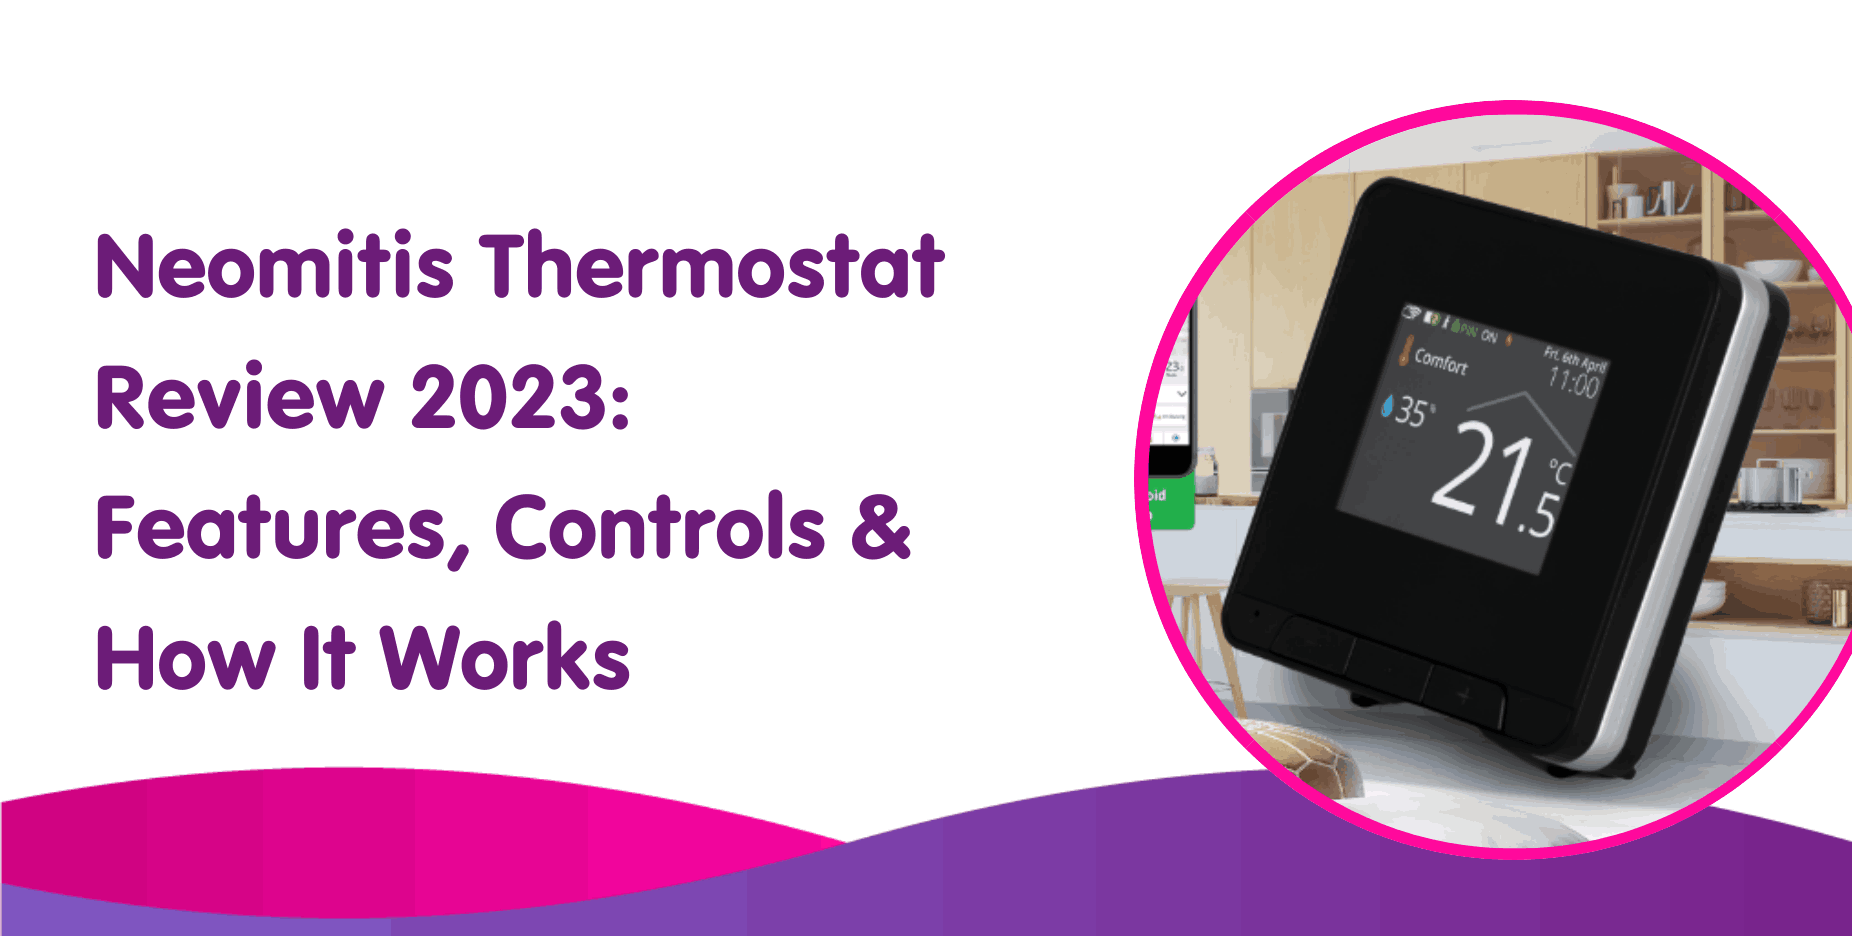 Neomitis Thermostat Review 2023: Features, Controls & How It Works